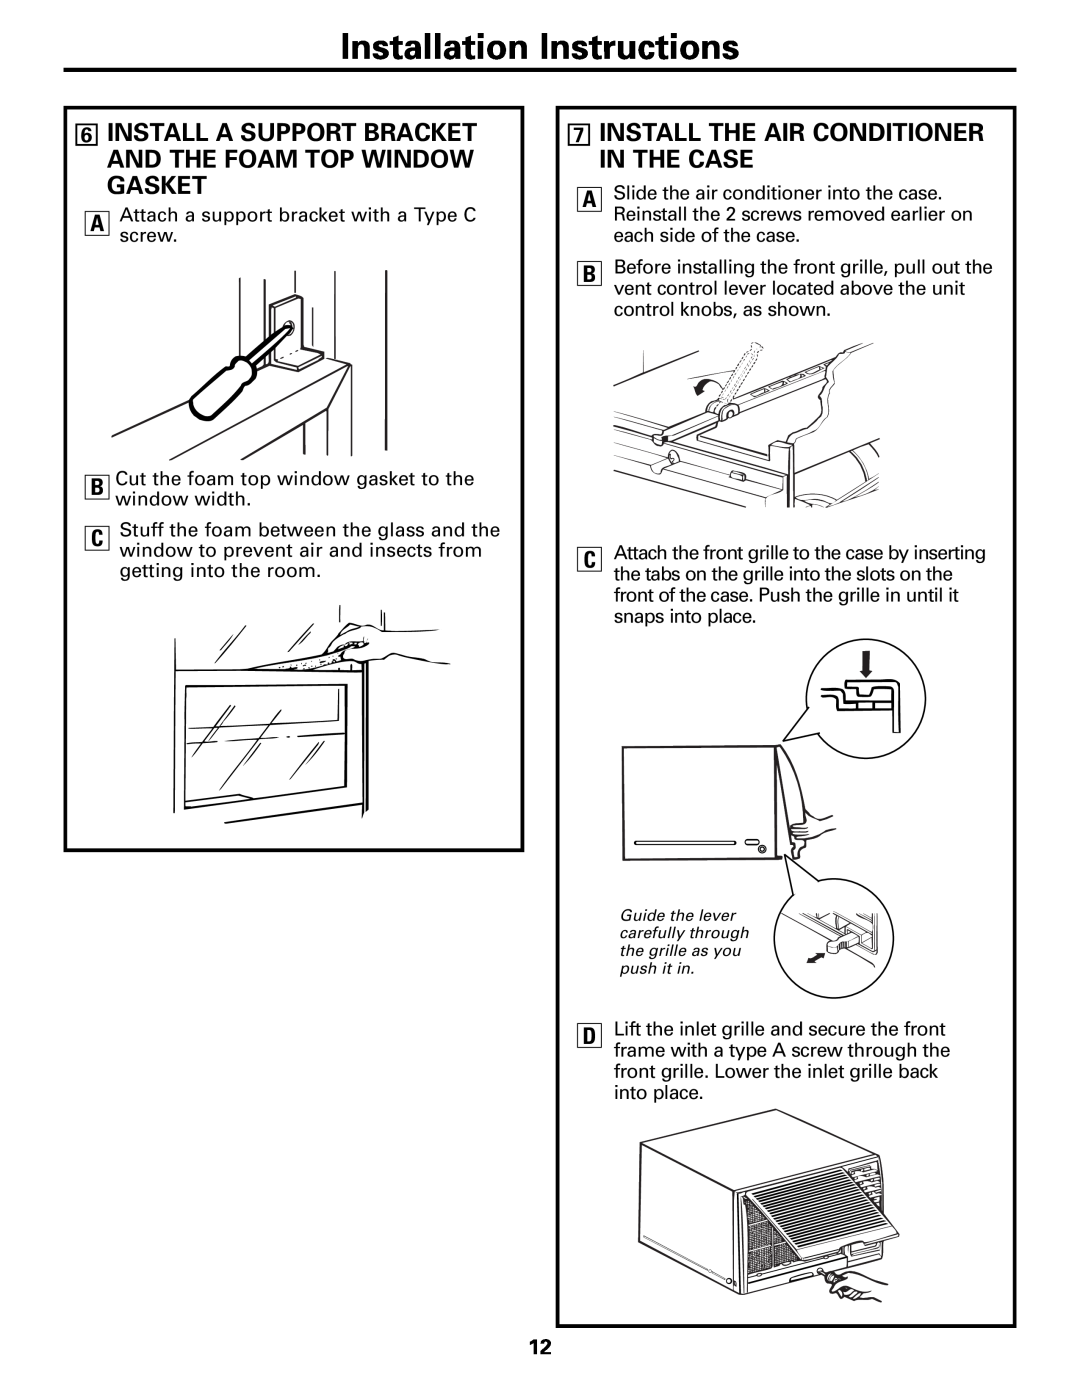 GE AGE07 installation instructions 7INSTALL THE AIR CONDITIONER IN THE CASE, Installation Instructions 